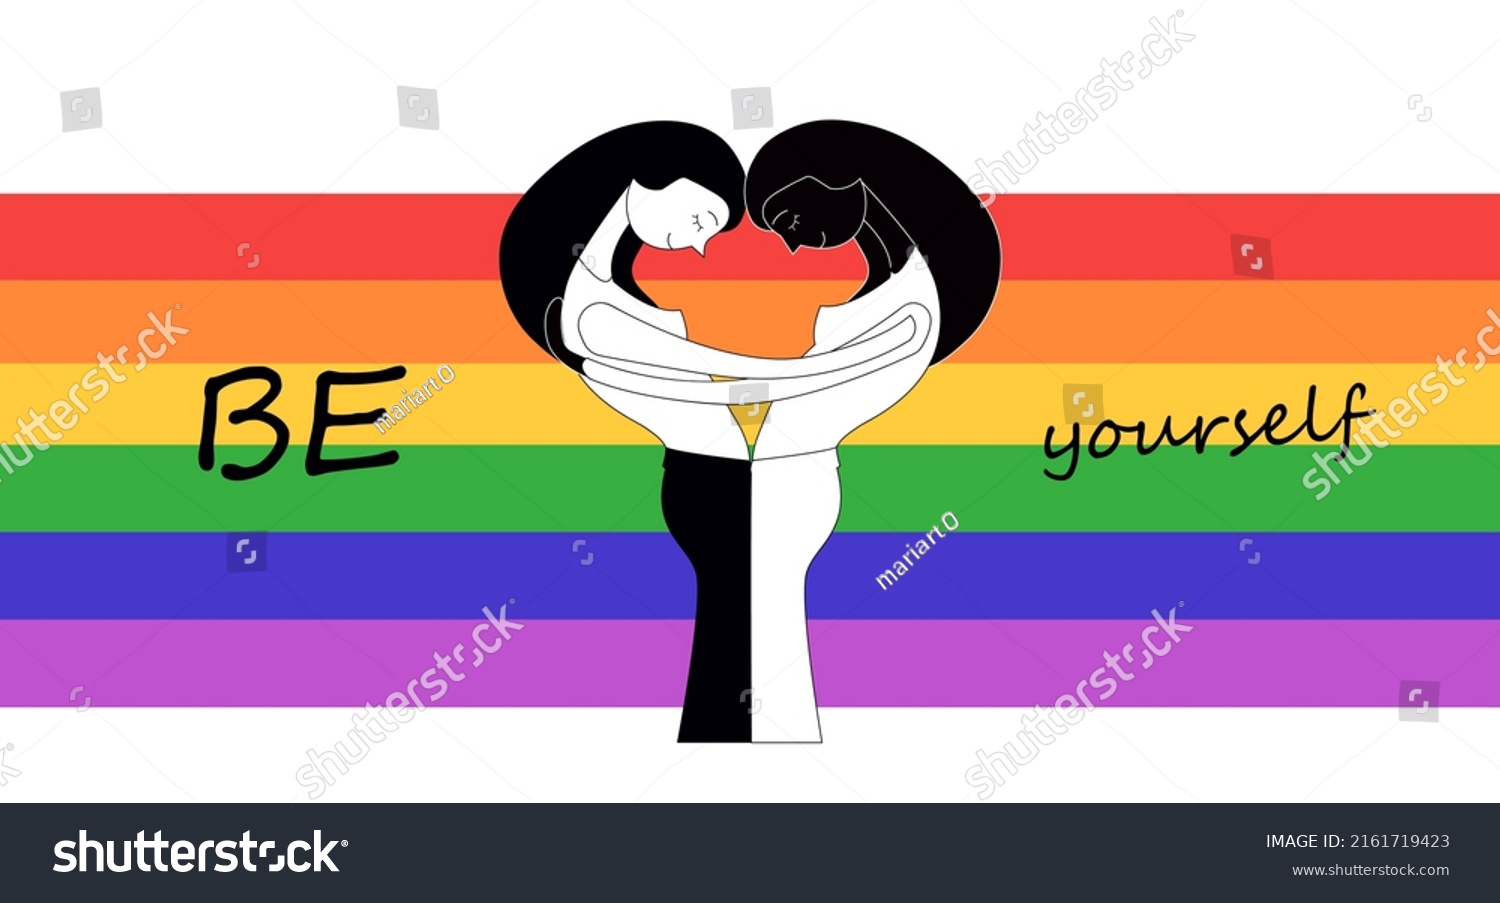 Poster Two Girls Hugging Rainbow Stock Vector Royalty Free 2161719423 Shutterstock 